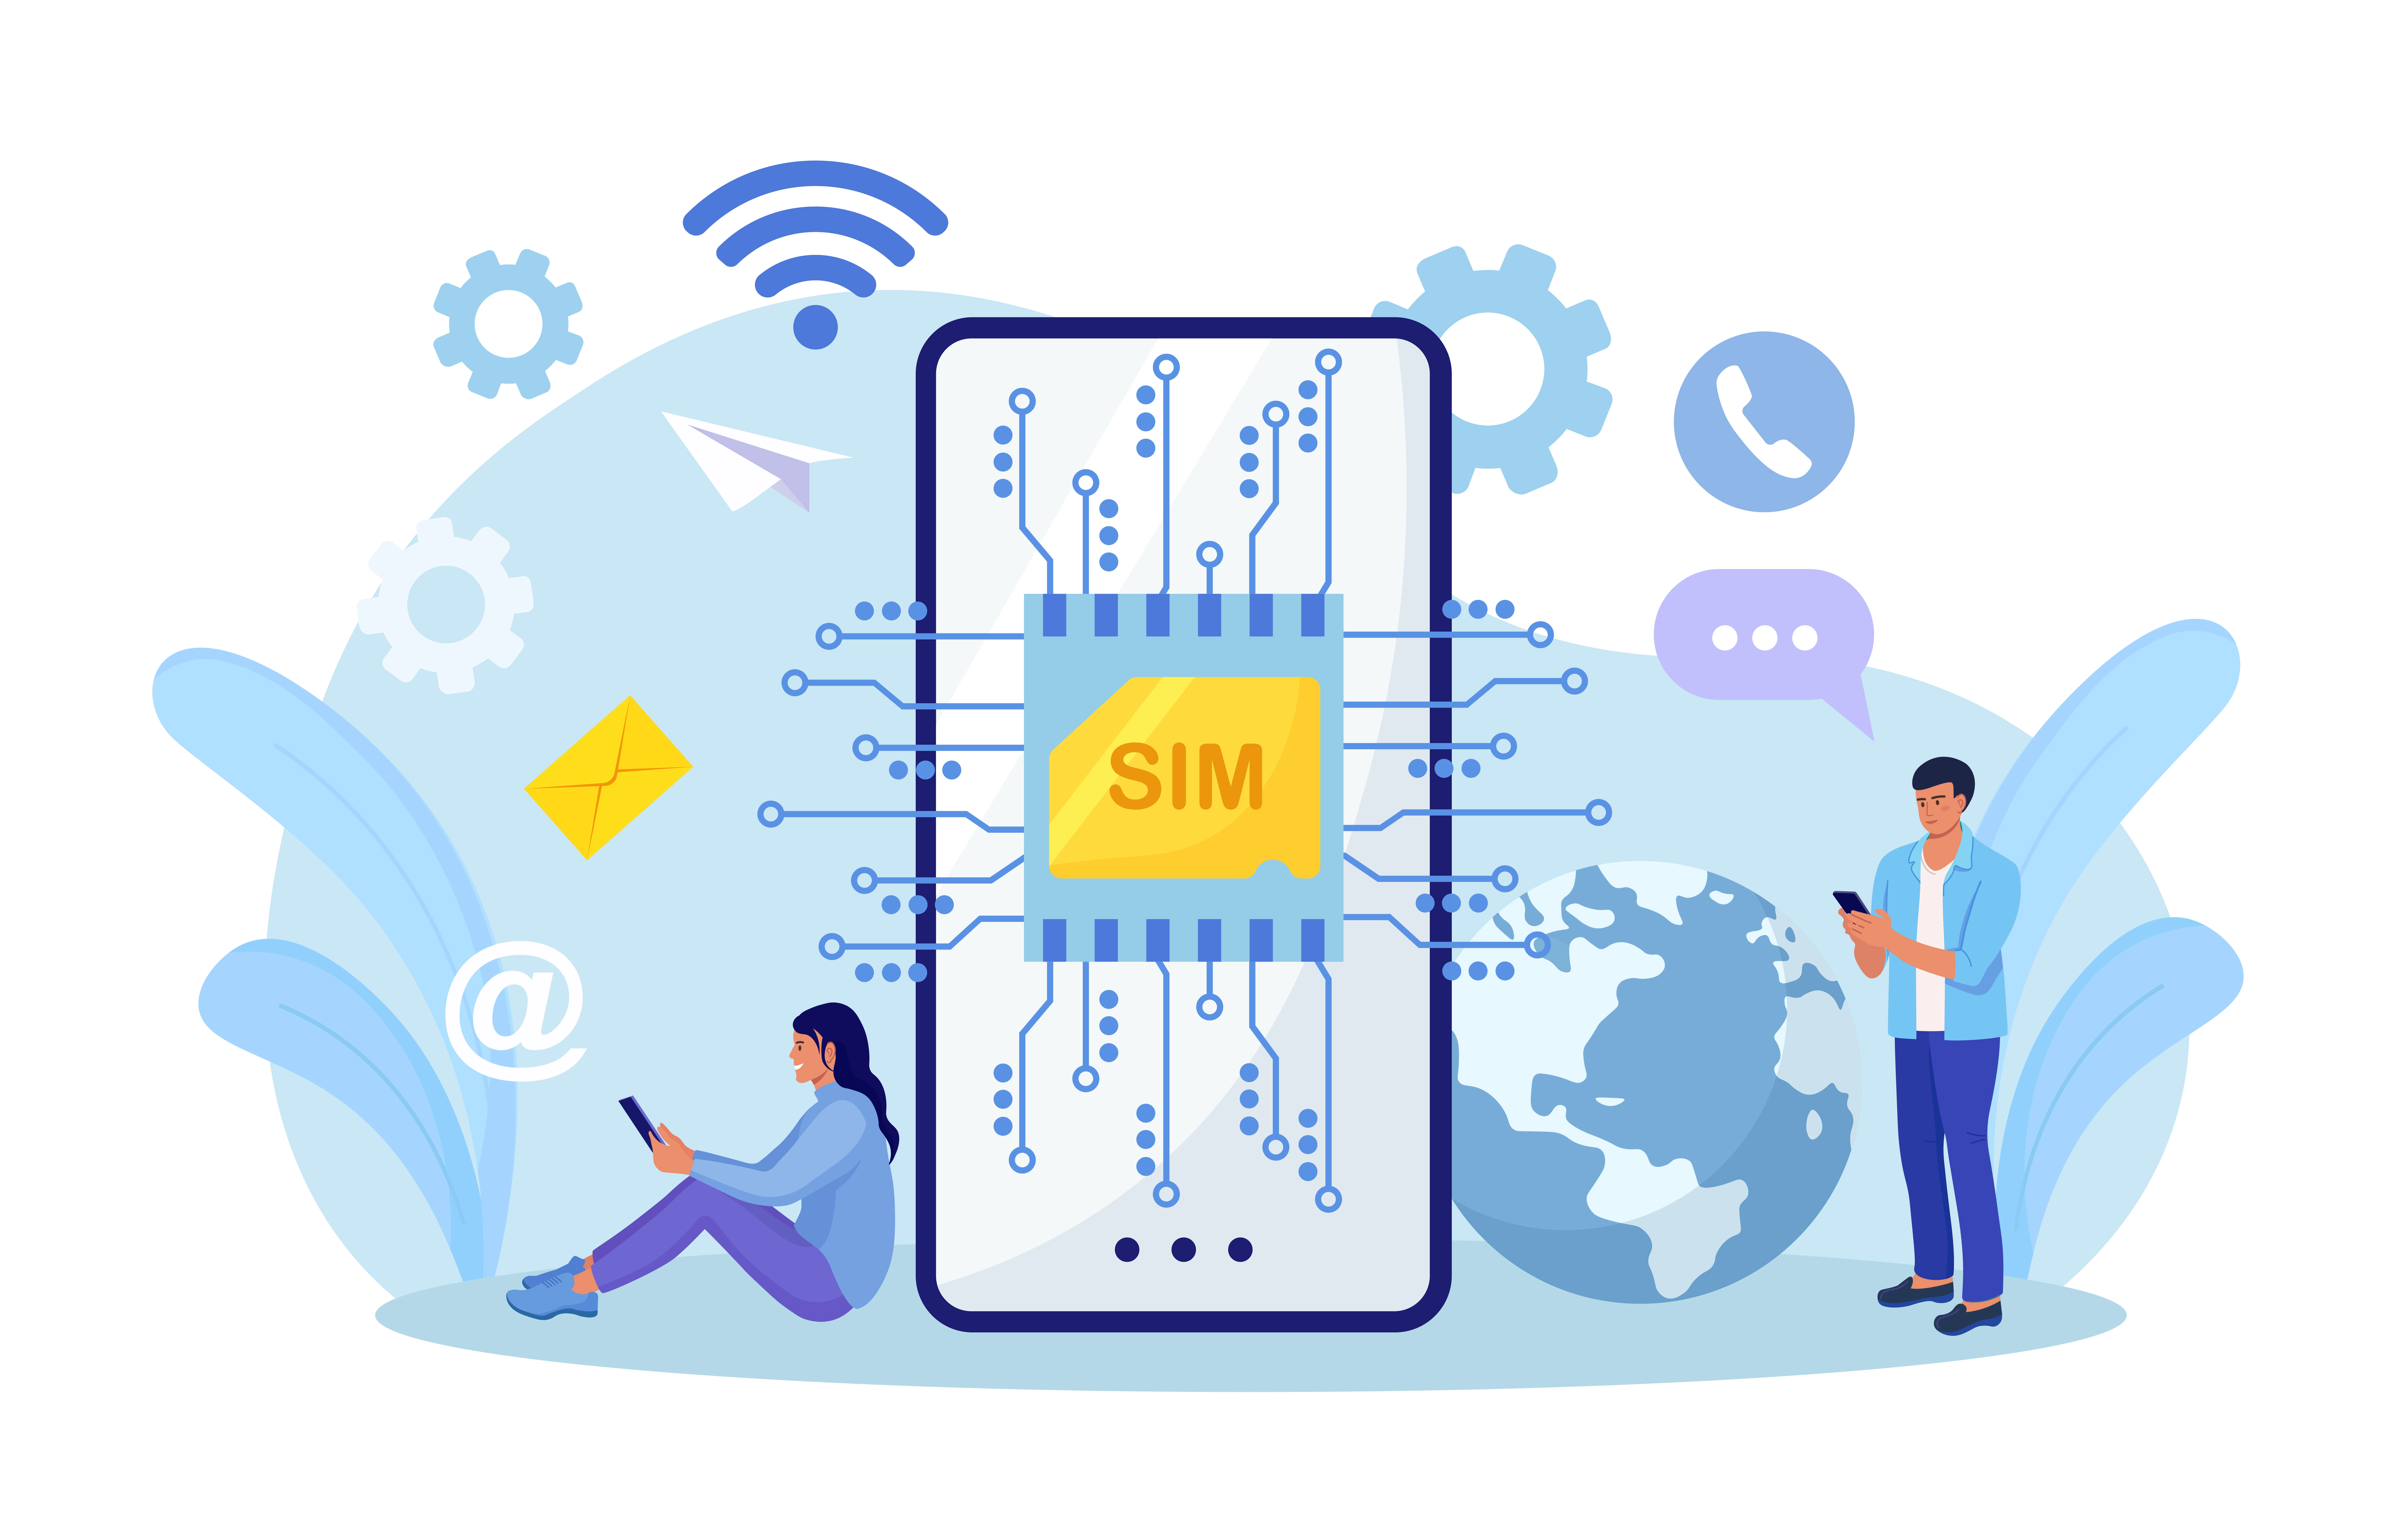 embedded sim card microcircuit young people use modern mobile phone with sim card chip new digital technology smartphone with integrated circuit card